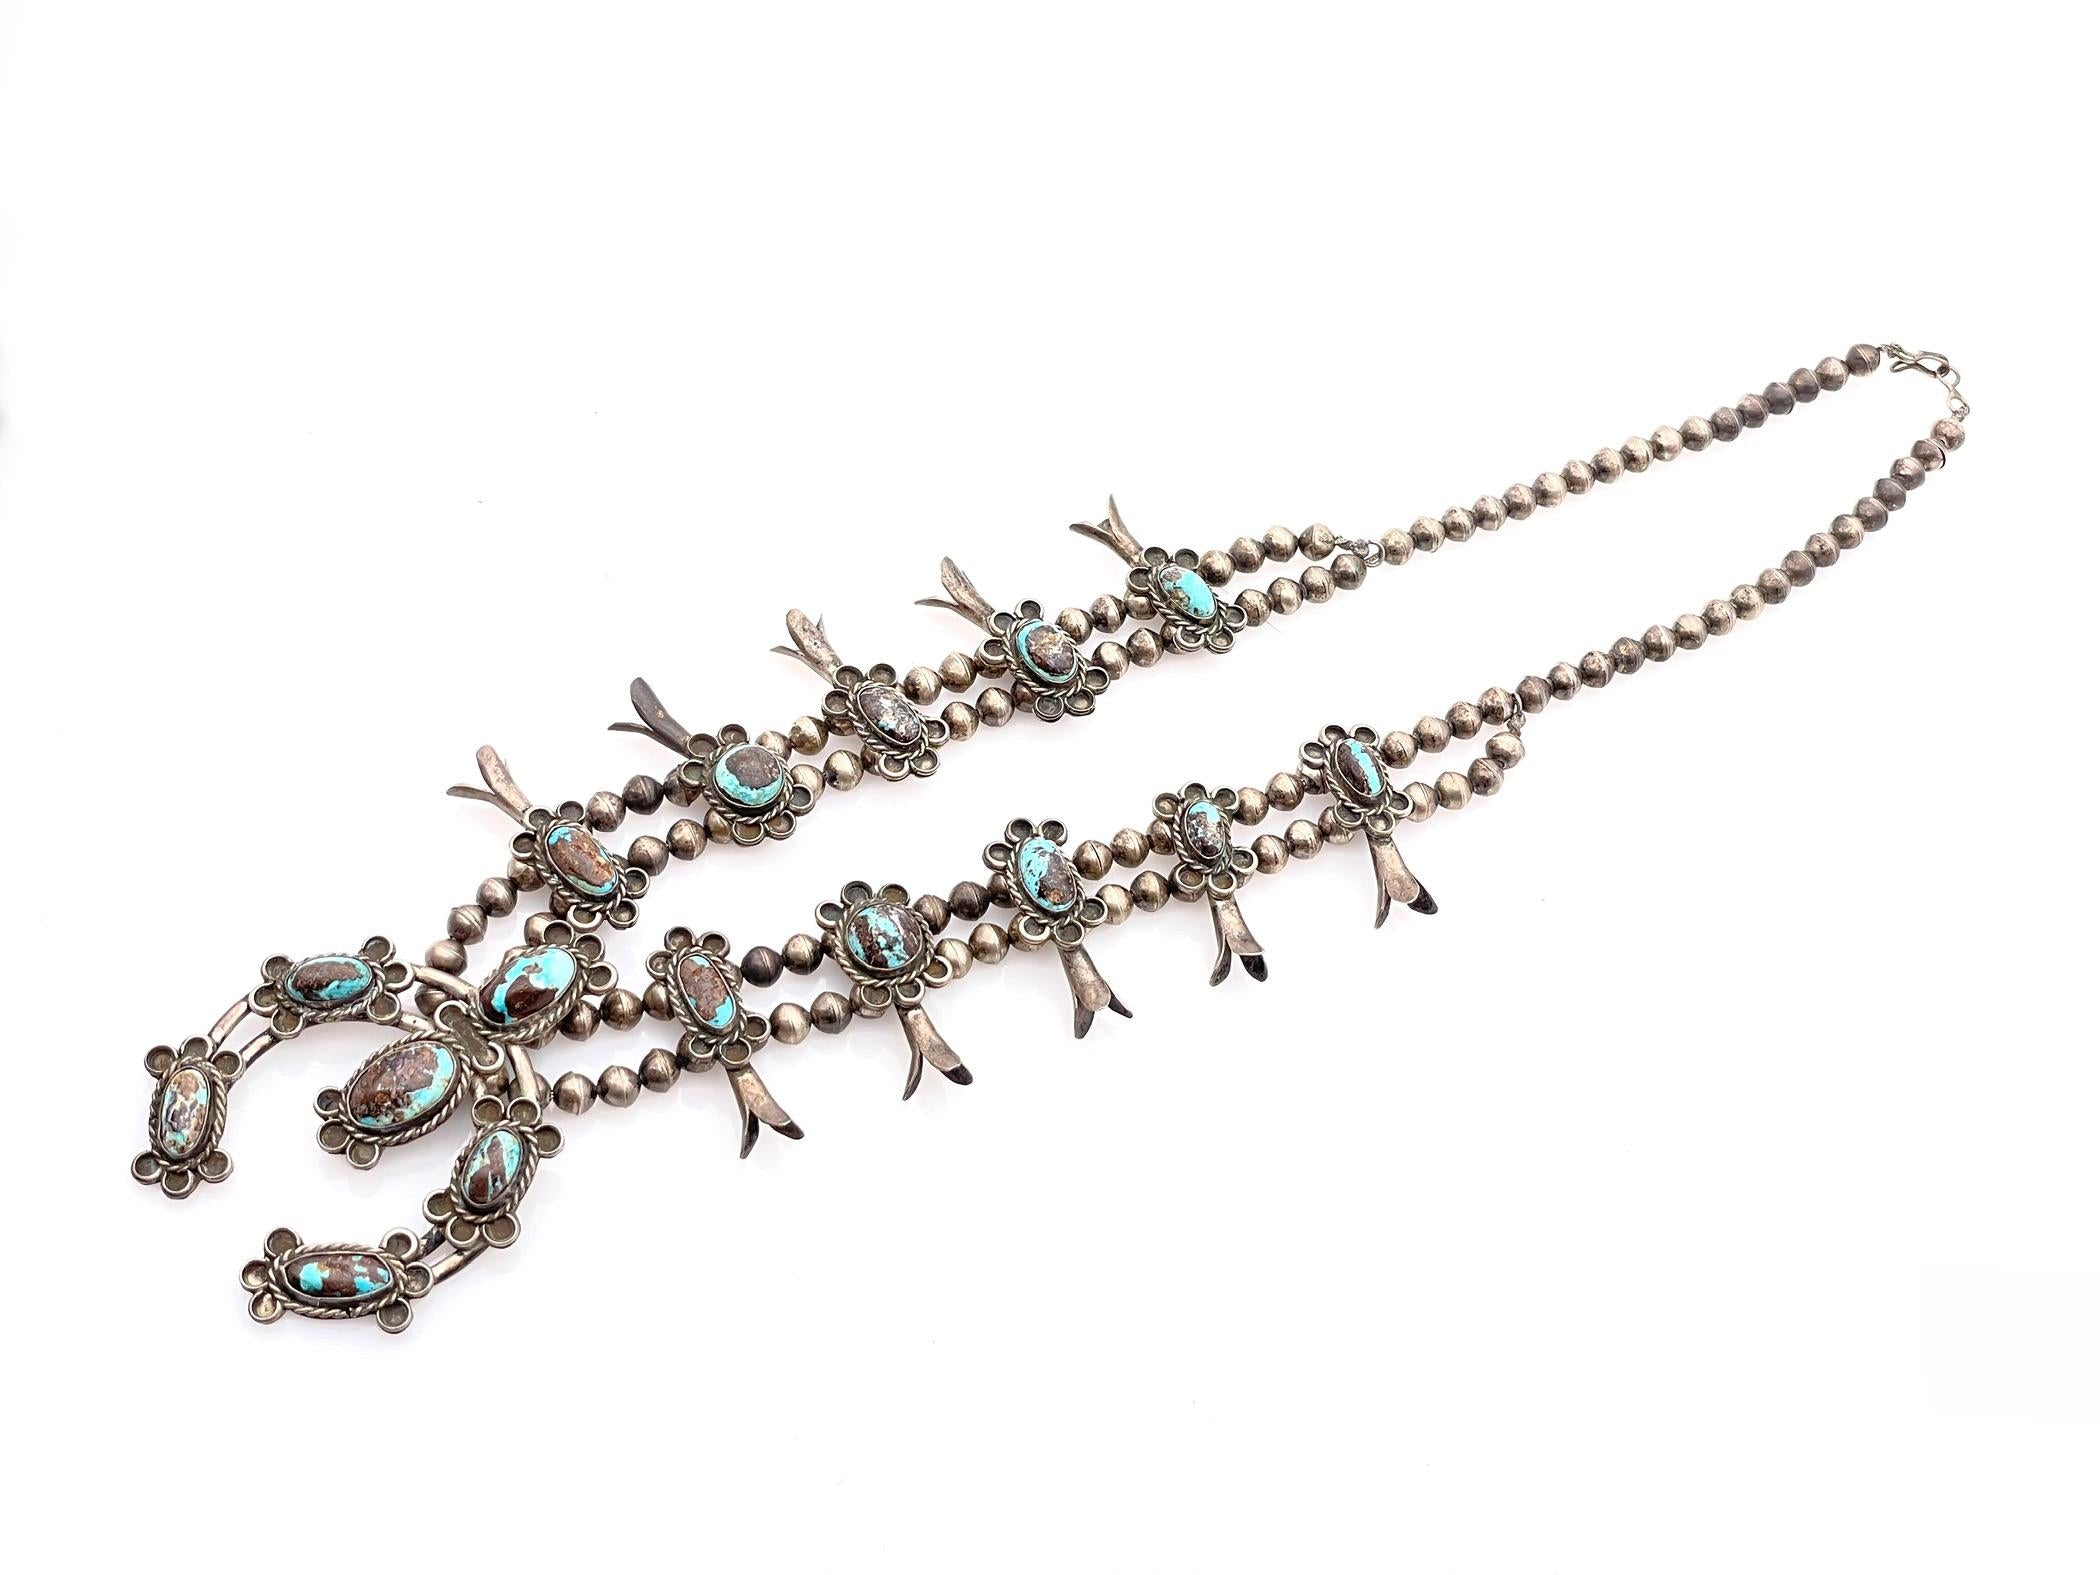 VINTAGE NATIVE AMERICAN STERLING SILVER TURQUOISE SQUASH BLOSSOM NECKLACE